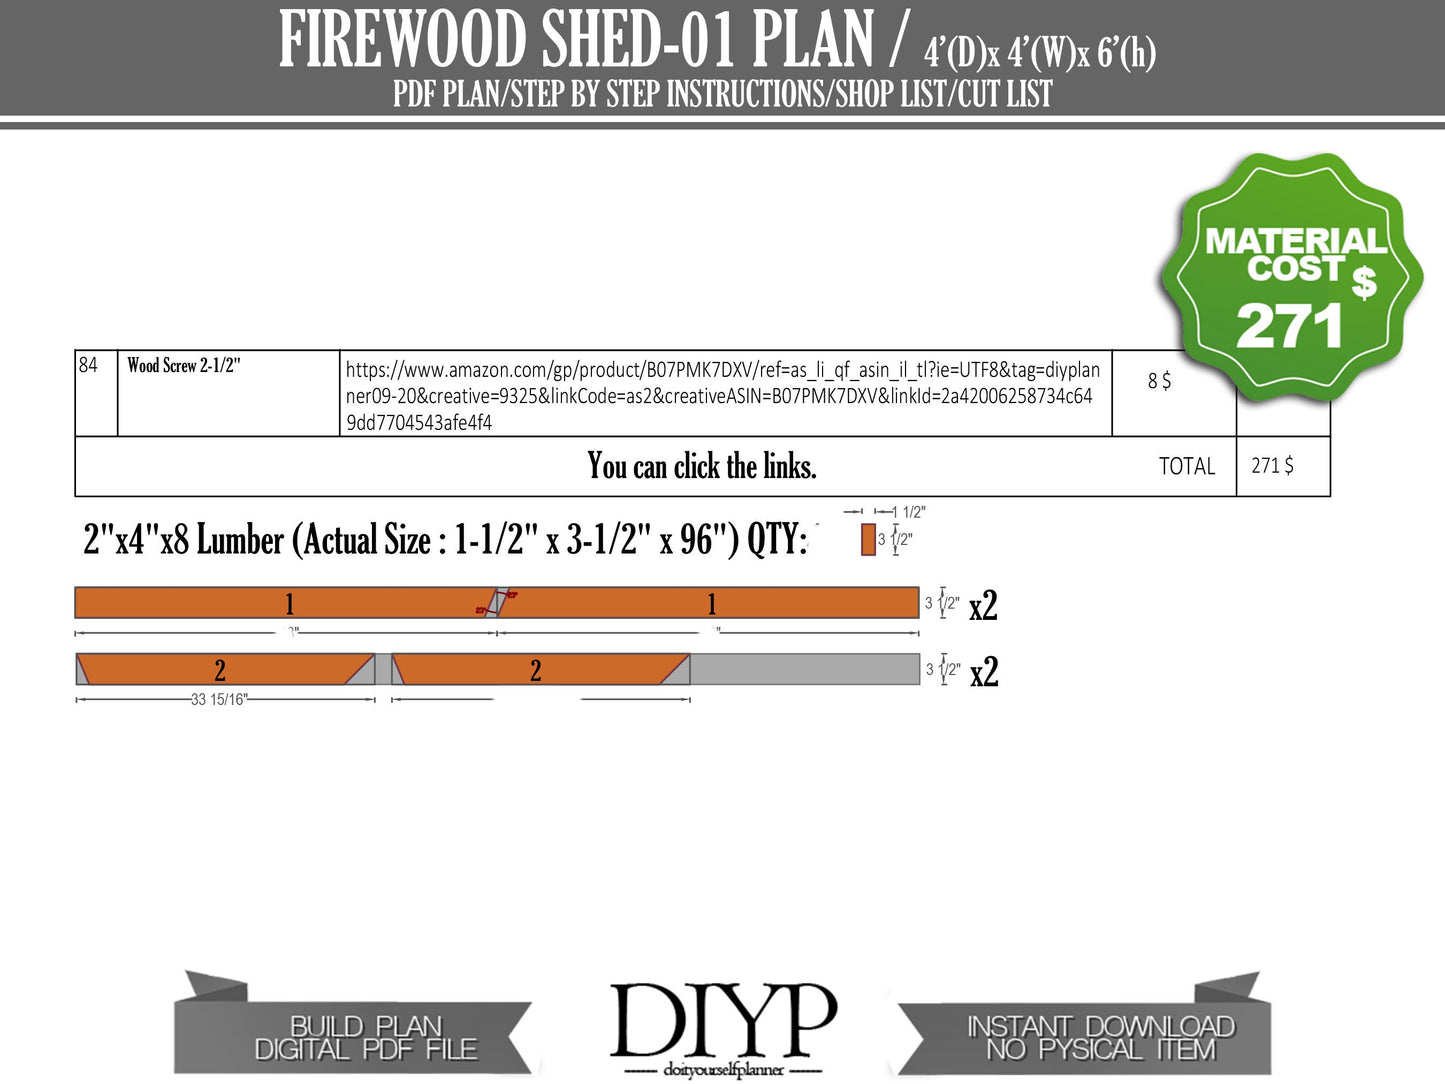 Firewood Shed Plans - How to build a firewood log rack